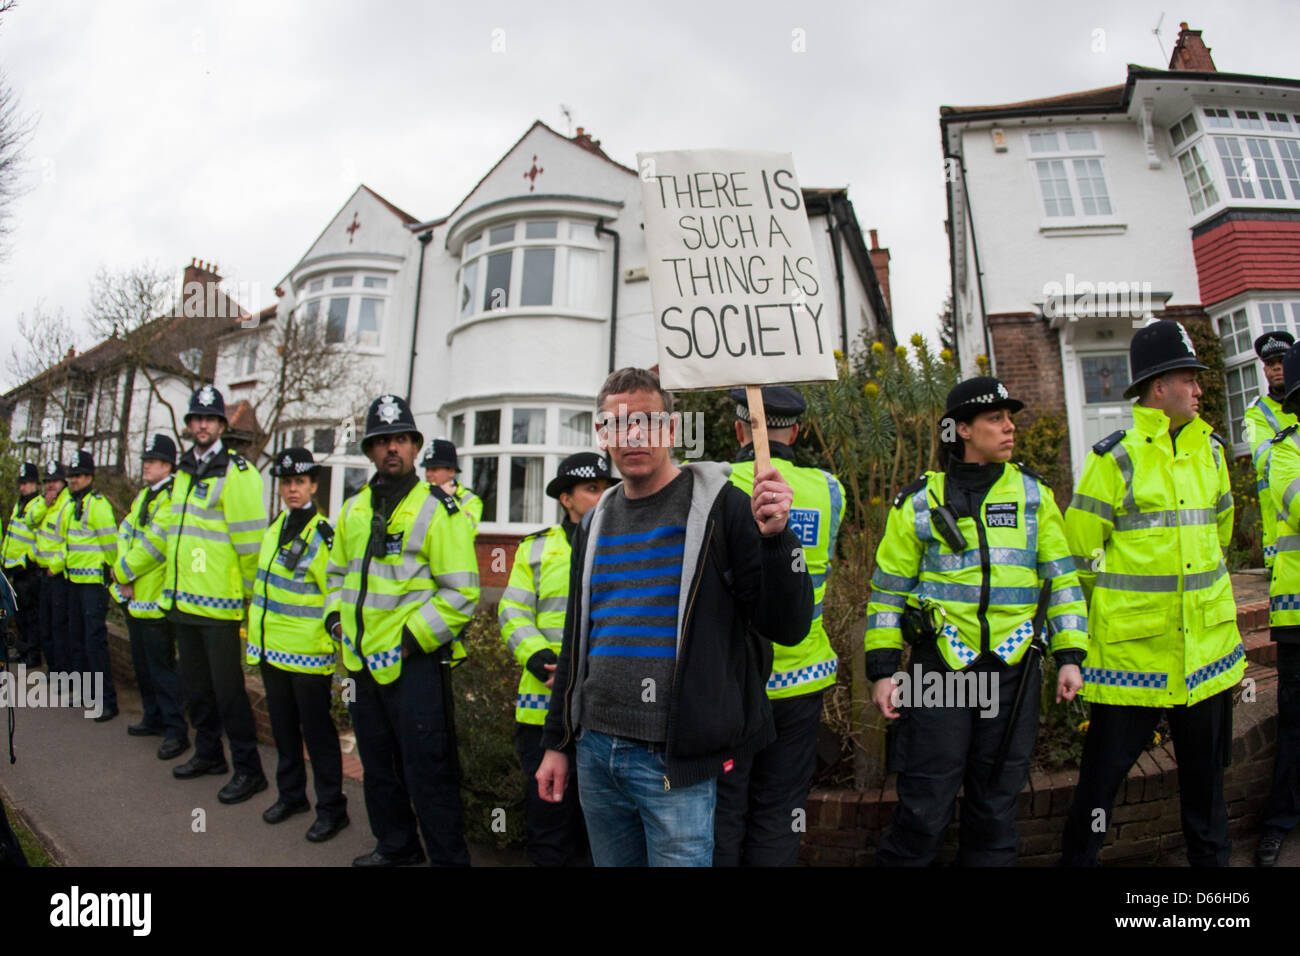 London, UK. 13th April 2013. Police line the street as UK Uncut stage 'Who Wants to Evict a Millionaire' event outside the home of Lord Freud, architect of the Welfare Reform Bill. Credit: Martyn Wheatley / Alamy Live News Stock Photo